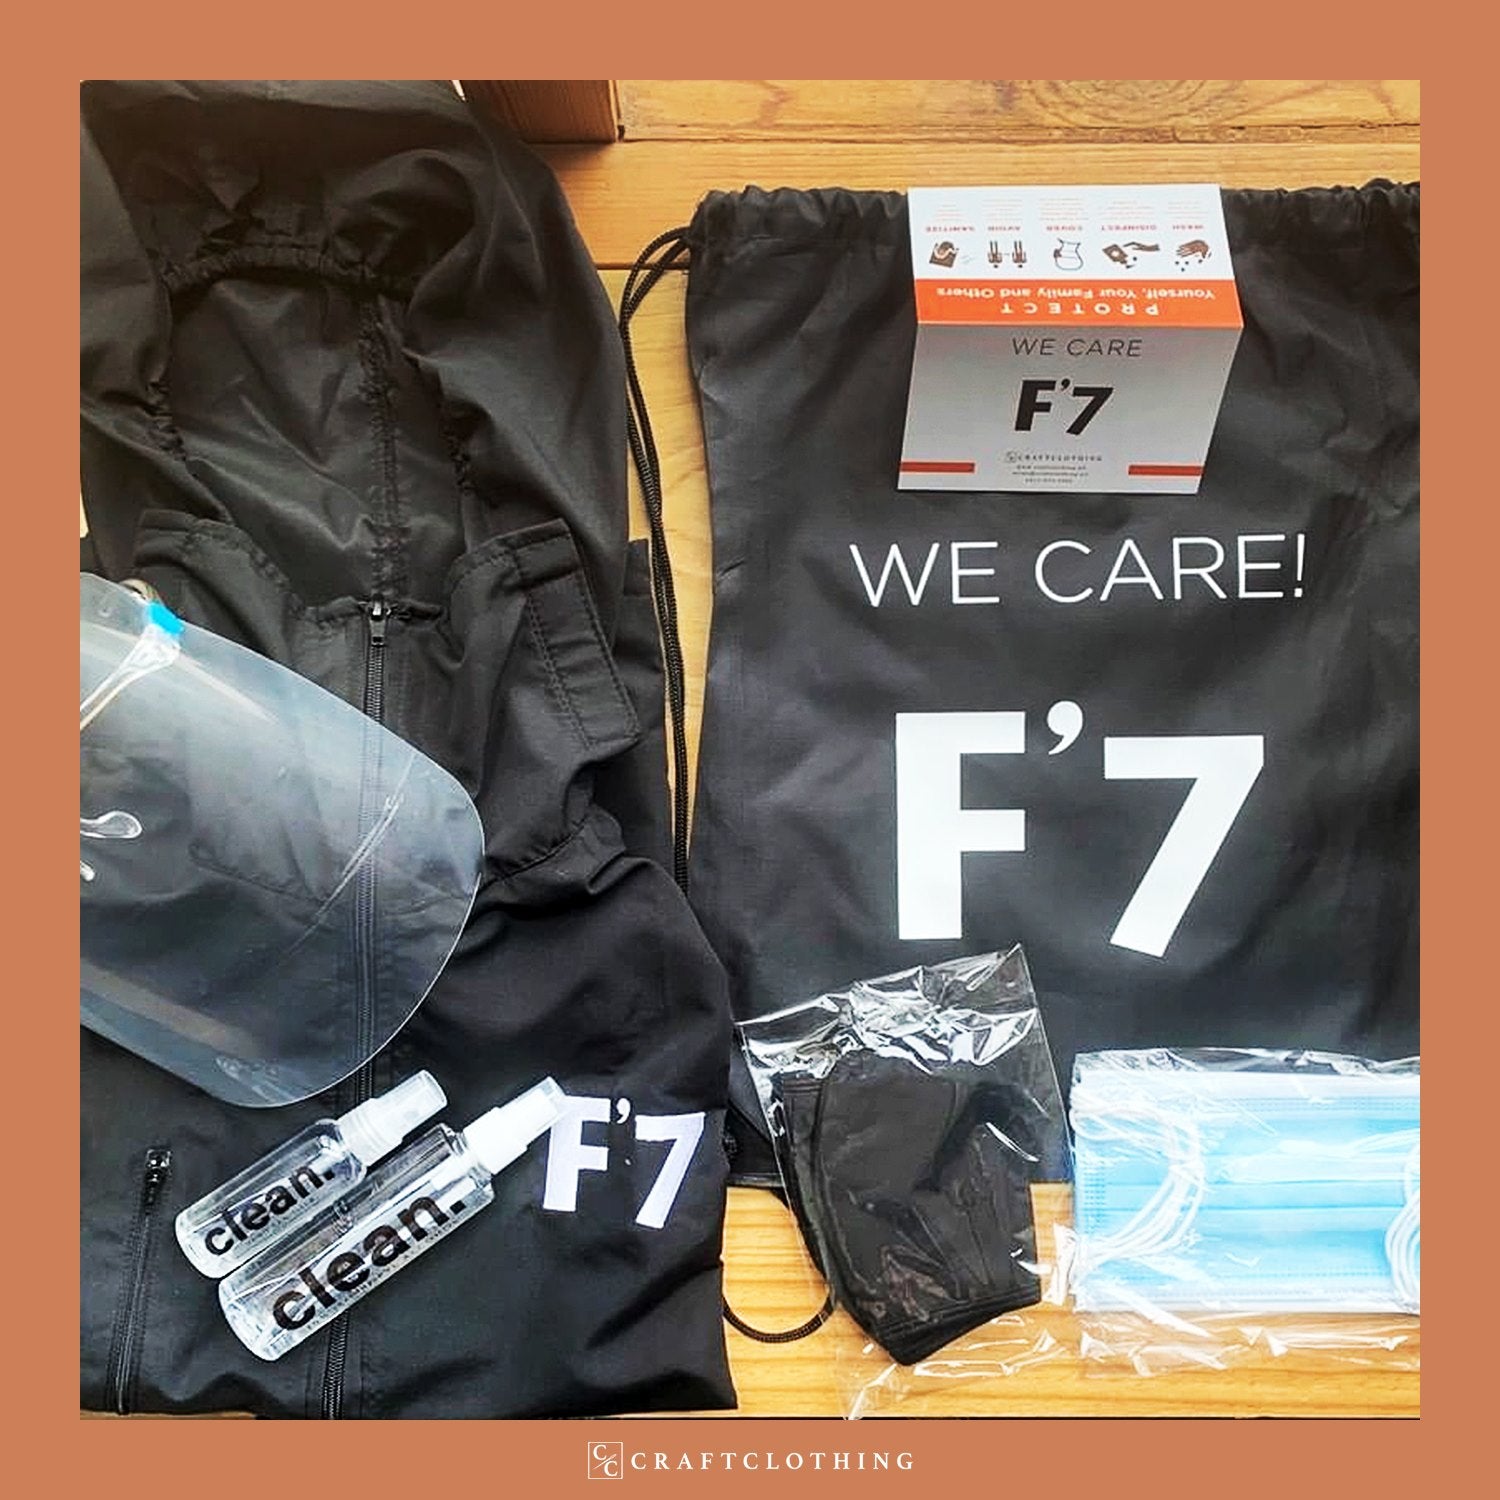 PROJECT FEATURE: F7’s Care Kits